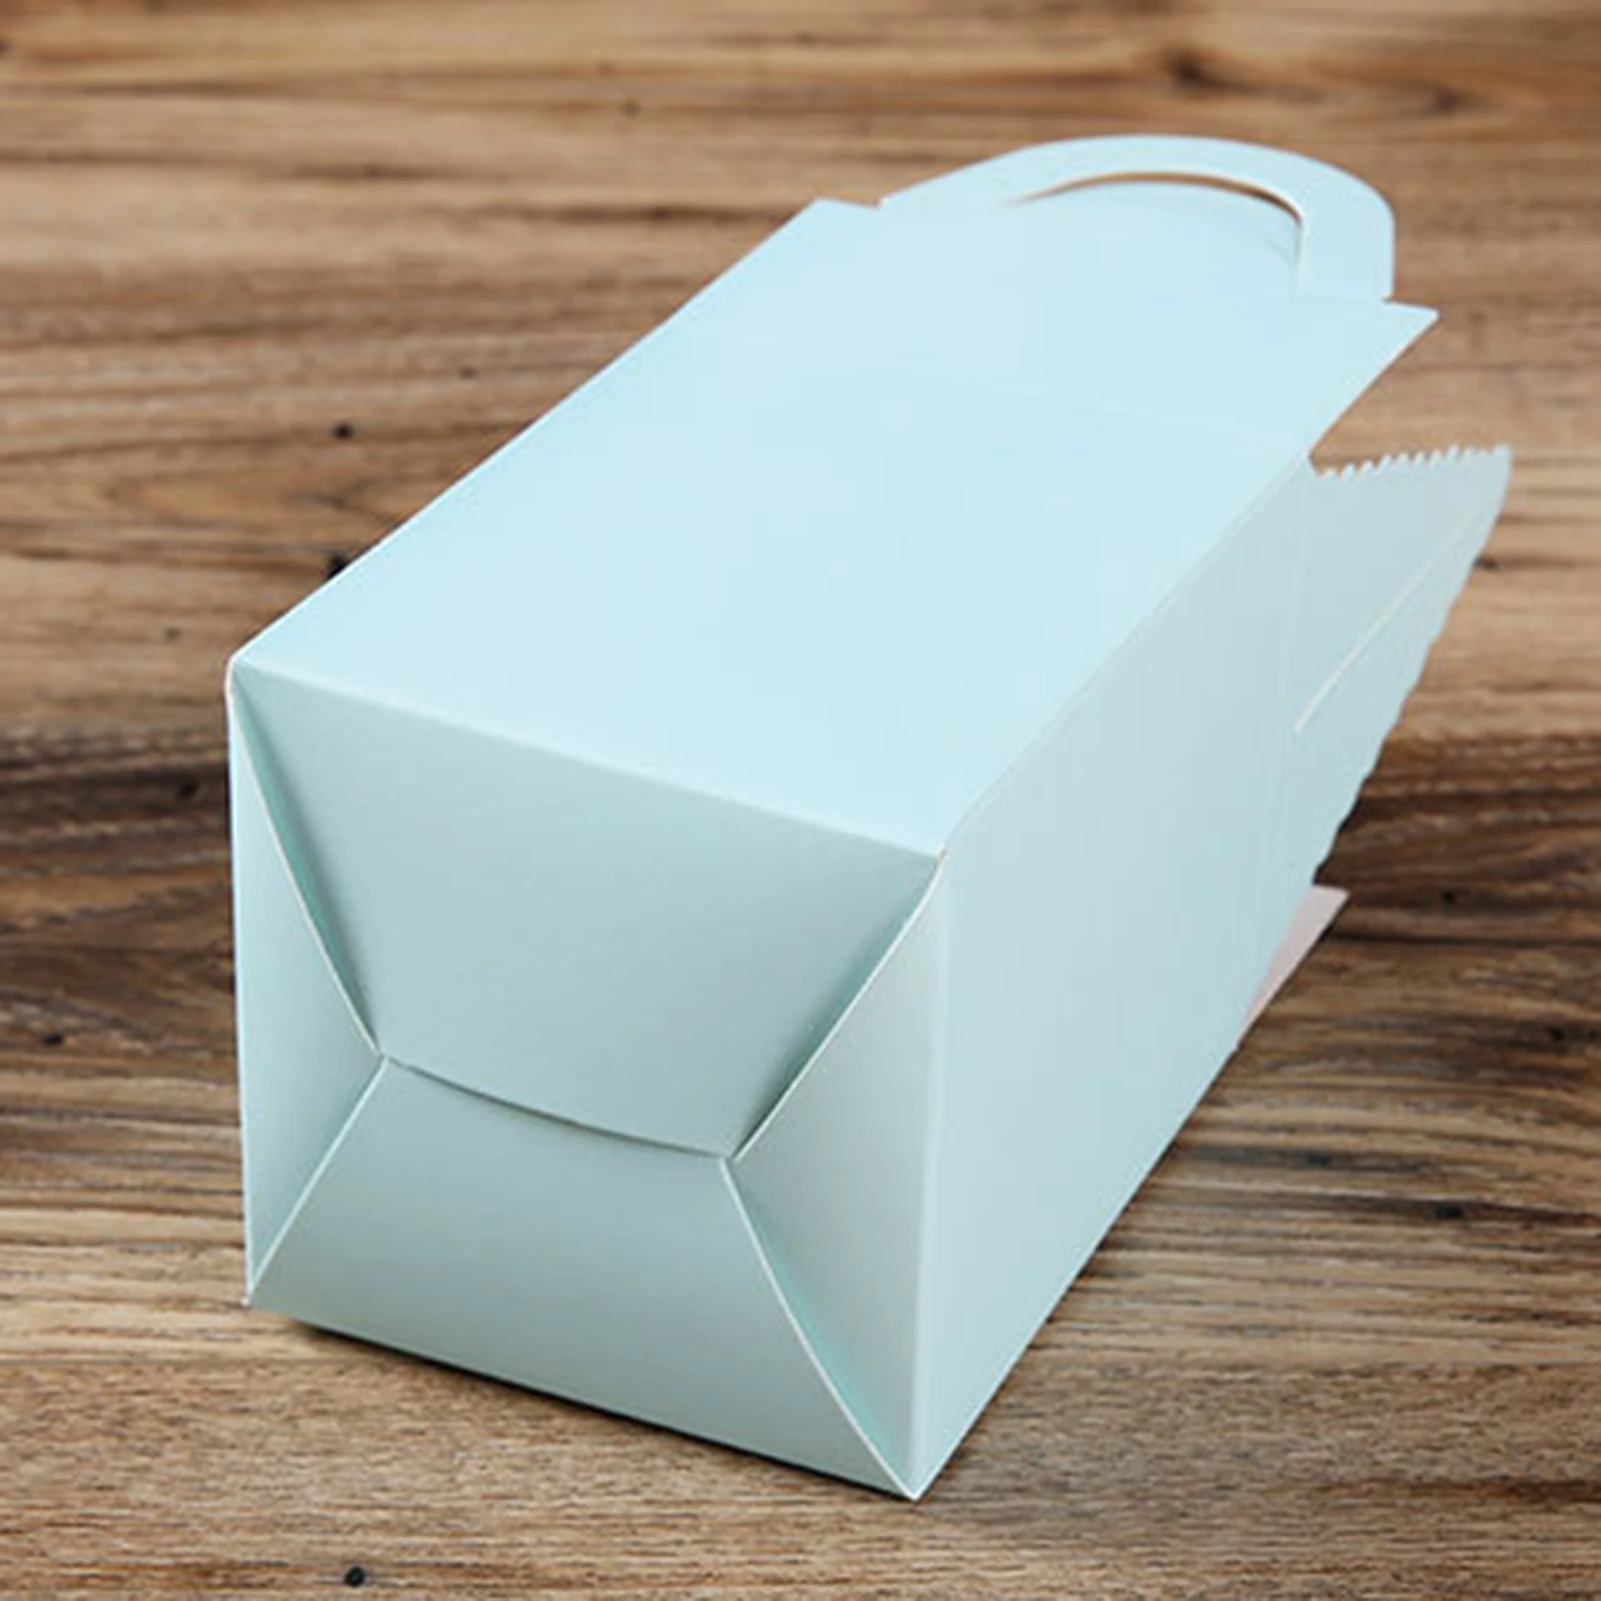 

Portable Cake Storage Box Cake Keeper Portable Round Cake Container For Cake Container Holds Pies